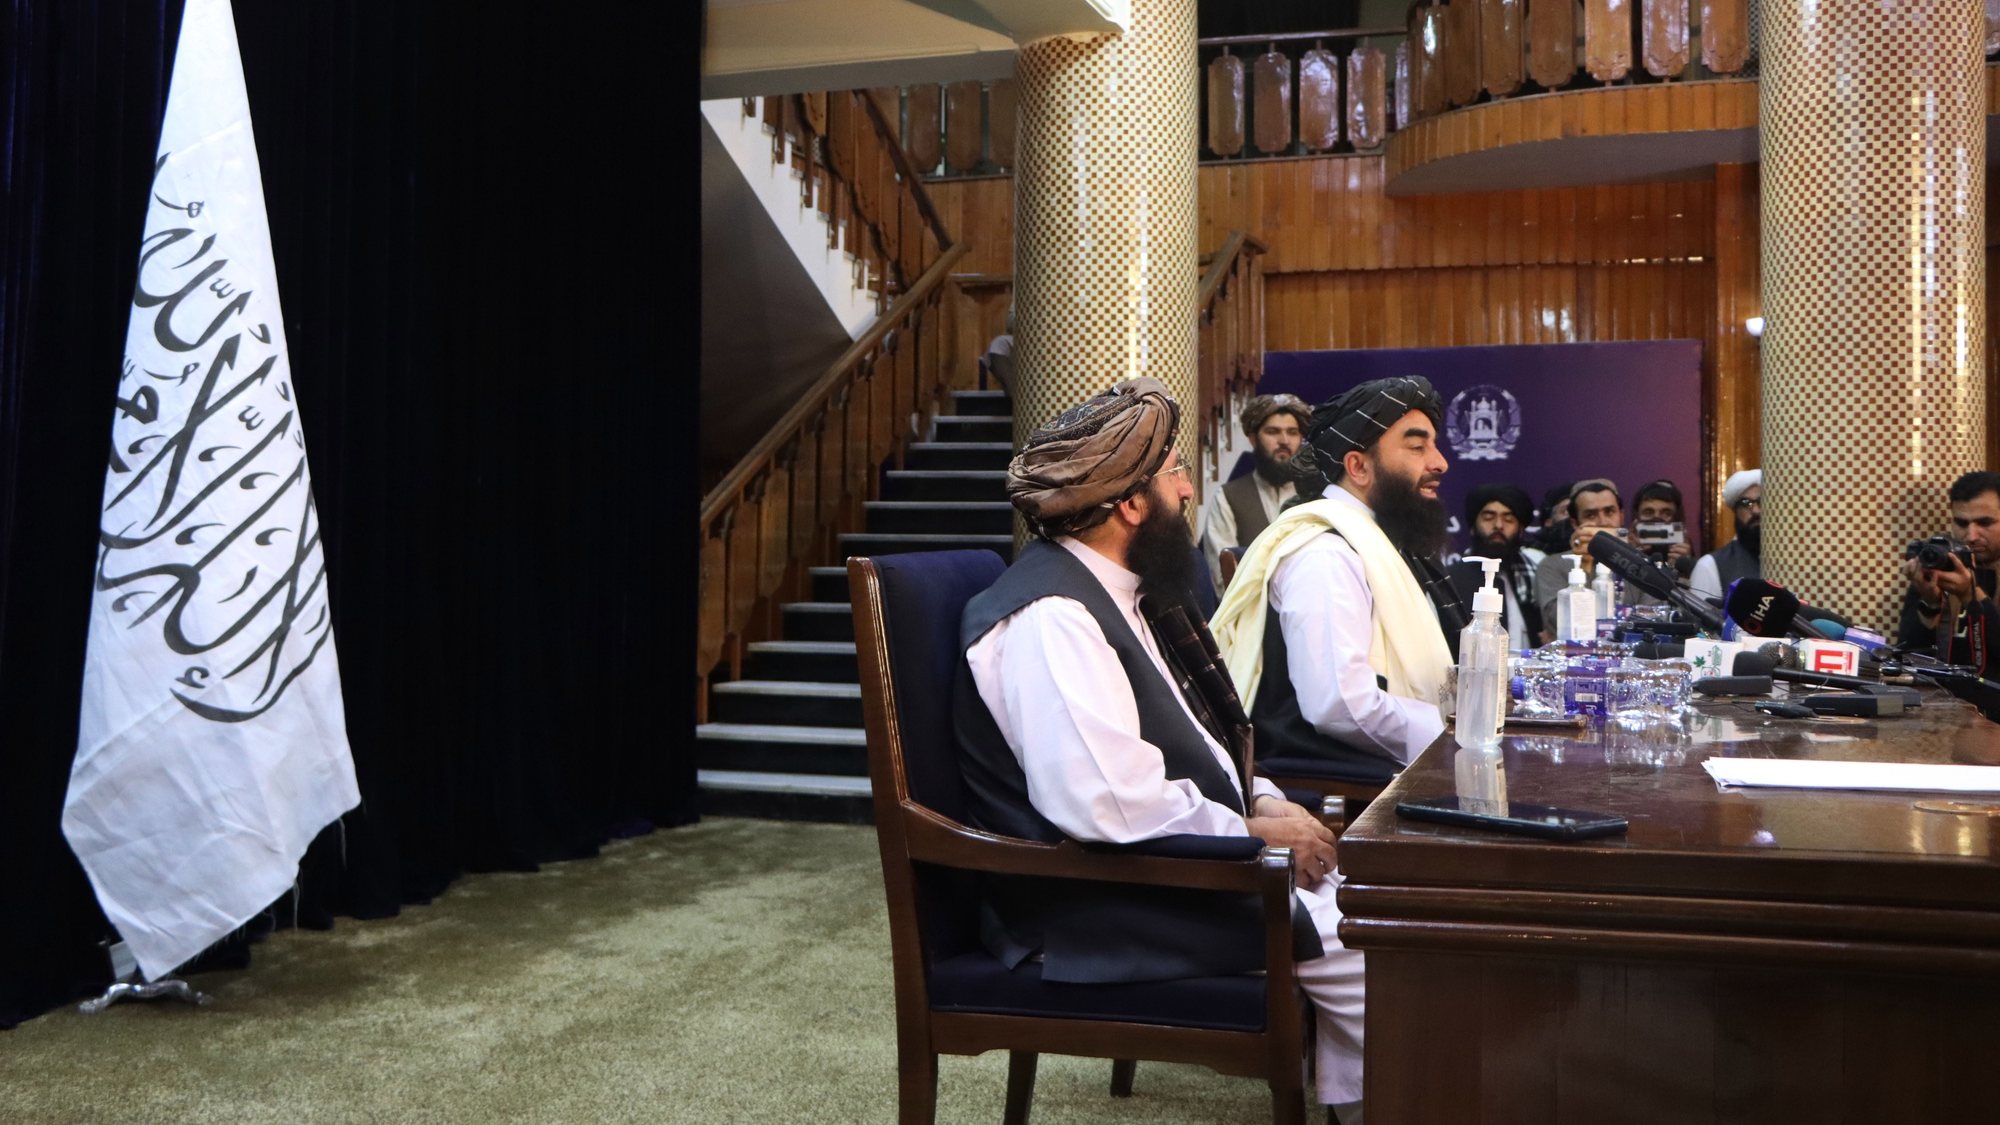 epa09418133 Zabihullah Mujahid, Taliban spokesman talks with journalists during a press conference in Kabul, Afghanistan, 17 August 2021. The new Taliban leadership that swept to power in Afghanistan has said it would not seek revenge against those who had fought against it and would protect the rights of Afghan women within the rules of Sharia law. Mujahid added the Taliban would work to avoid any return to conflict or for Afghanistan to become a hub for terrorism that would threaten other countries in the region.  EPA/STRINGER